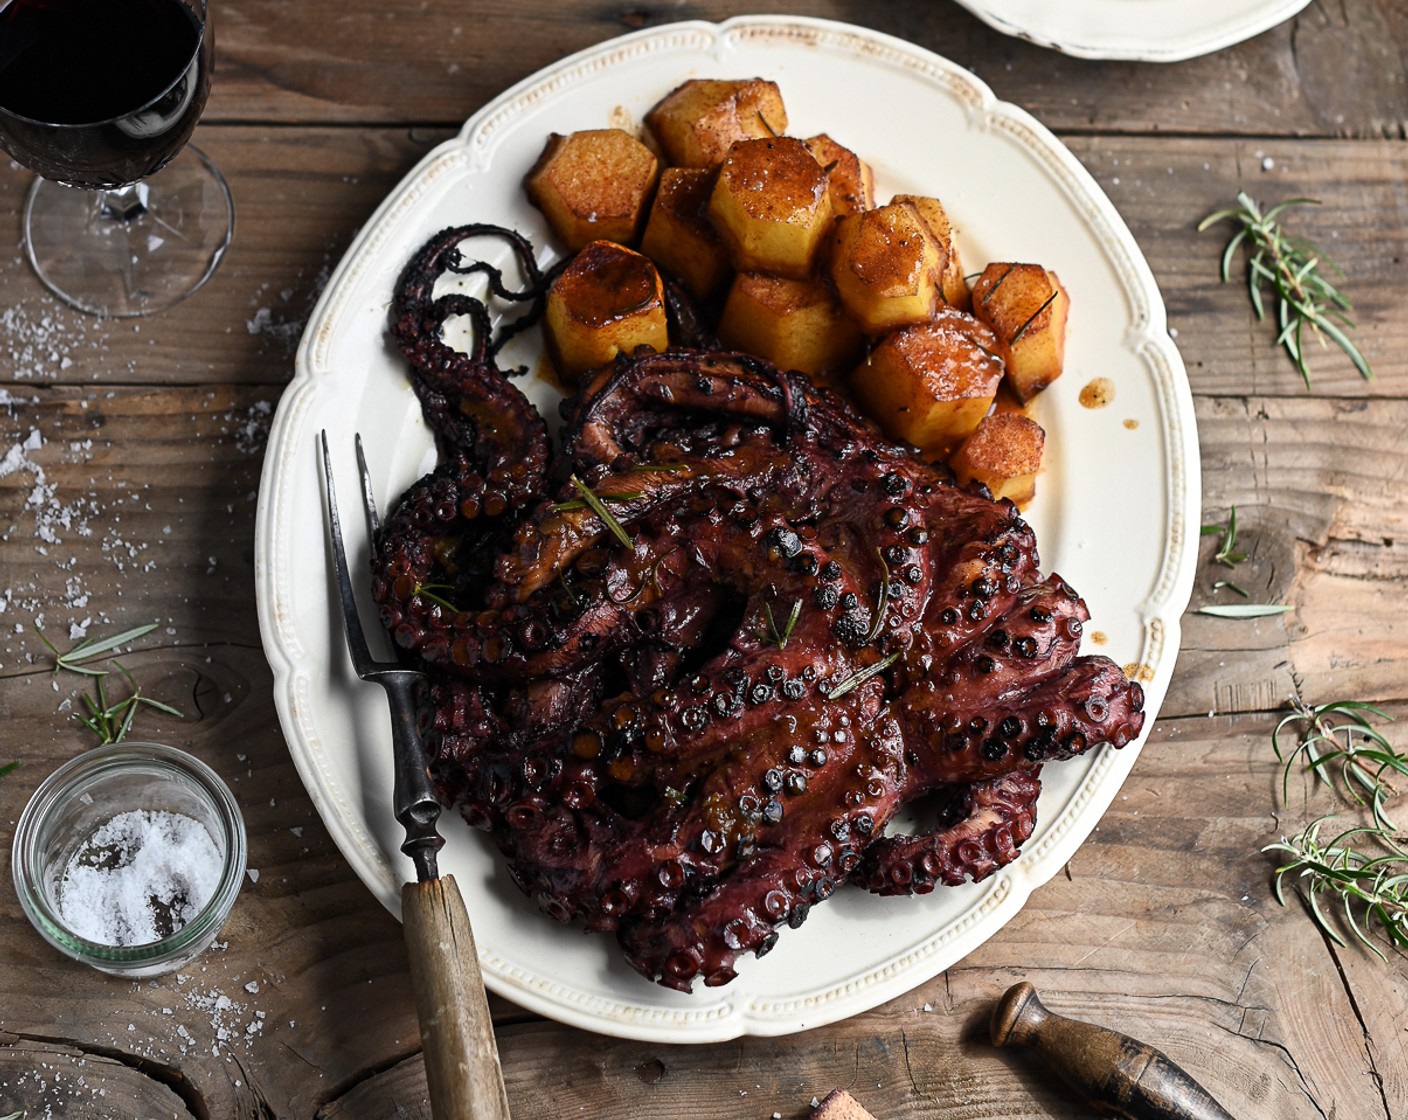 step 10 Transfer the roast potatoes and grilled octopus onto a warmed serving platter. Pour the leftover octopus cooking liquid into the potato pan and deglaze over high heat. Reduce the liquid until thickened and pour over the octopus and potatoes.